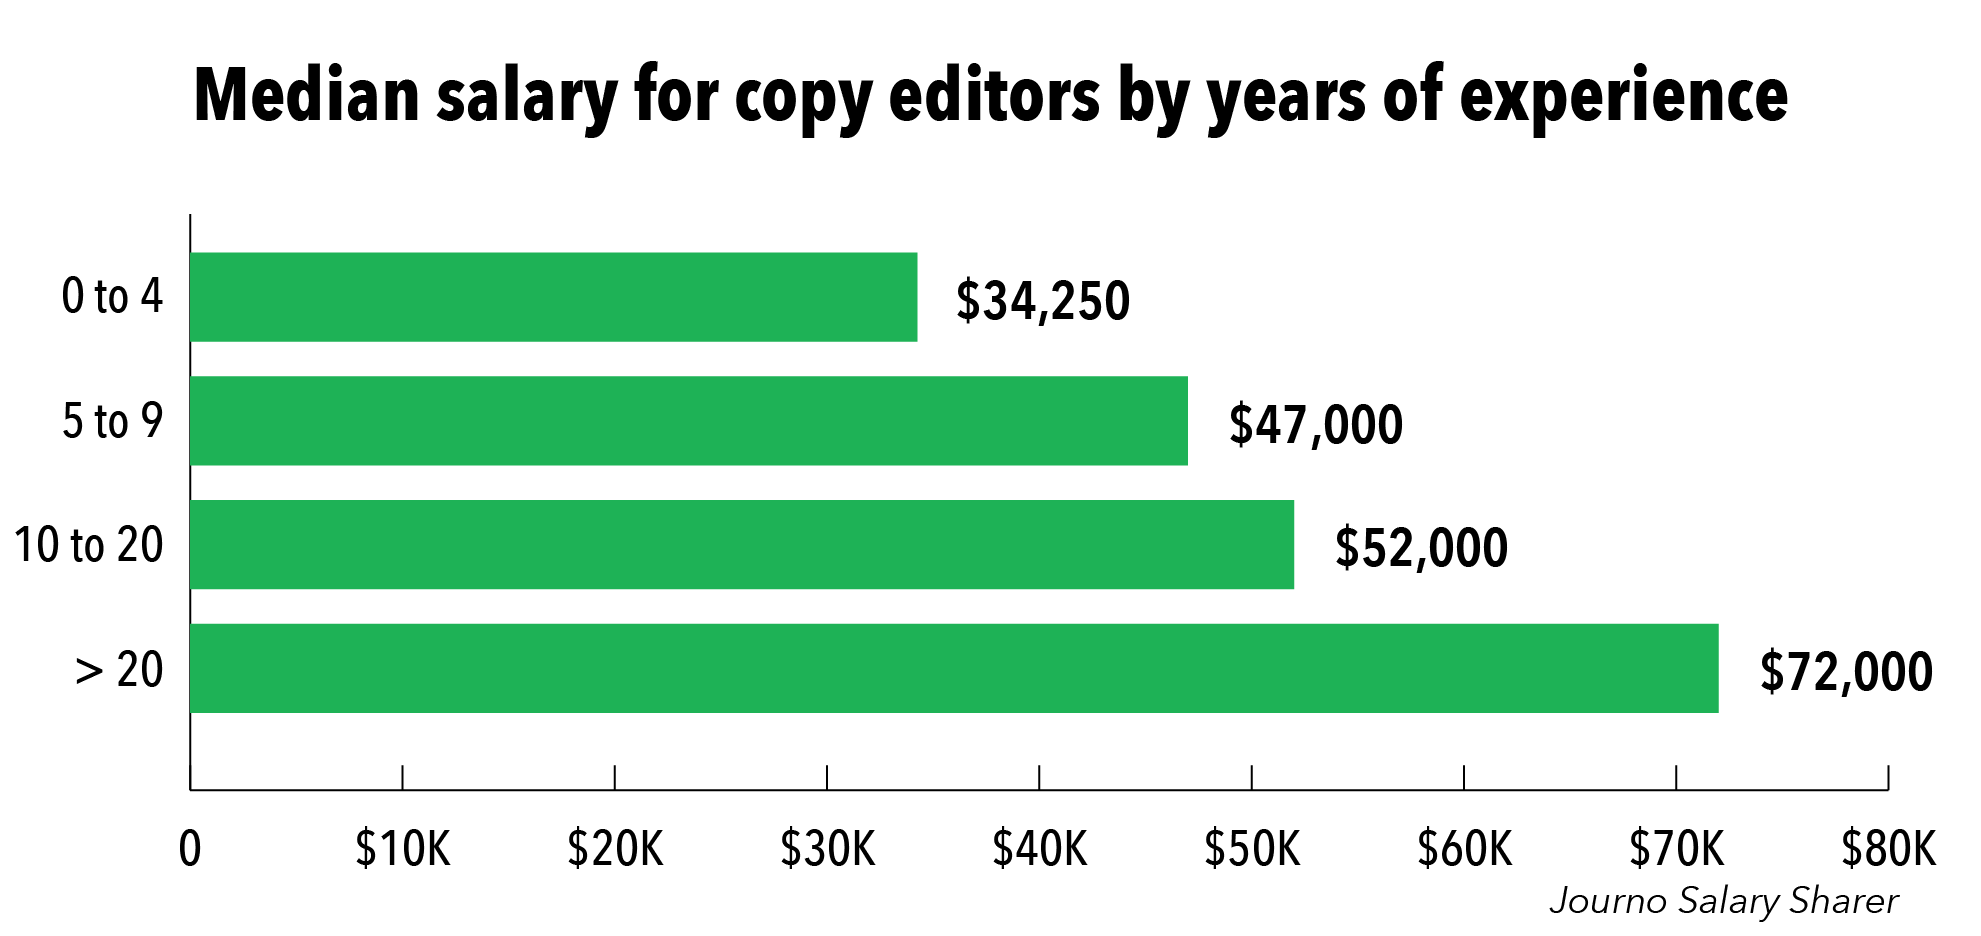 Journo Salary Sharer How Much Do Copy Editors Make By Julia Haslanger Journo Salary Sharer 6423